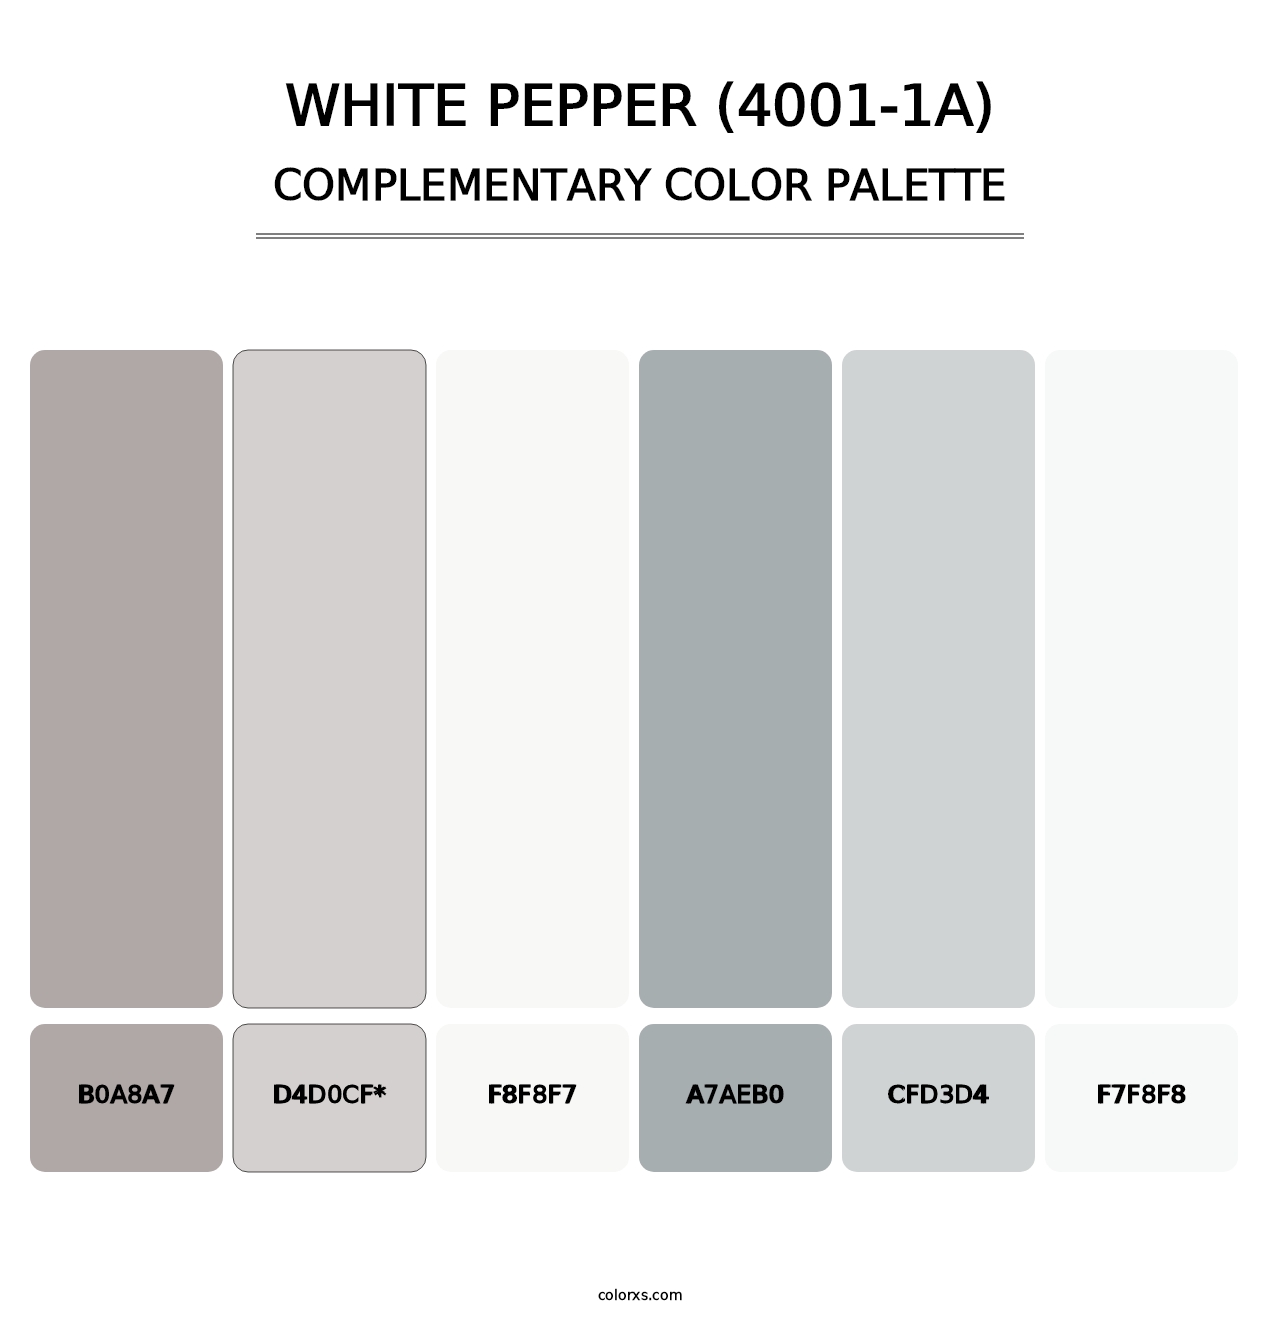 White Pepper (4001-1A) - Complementary Color Palette